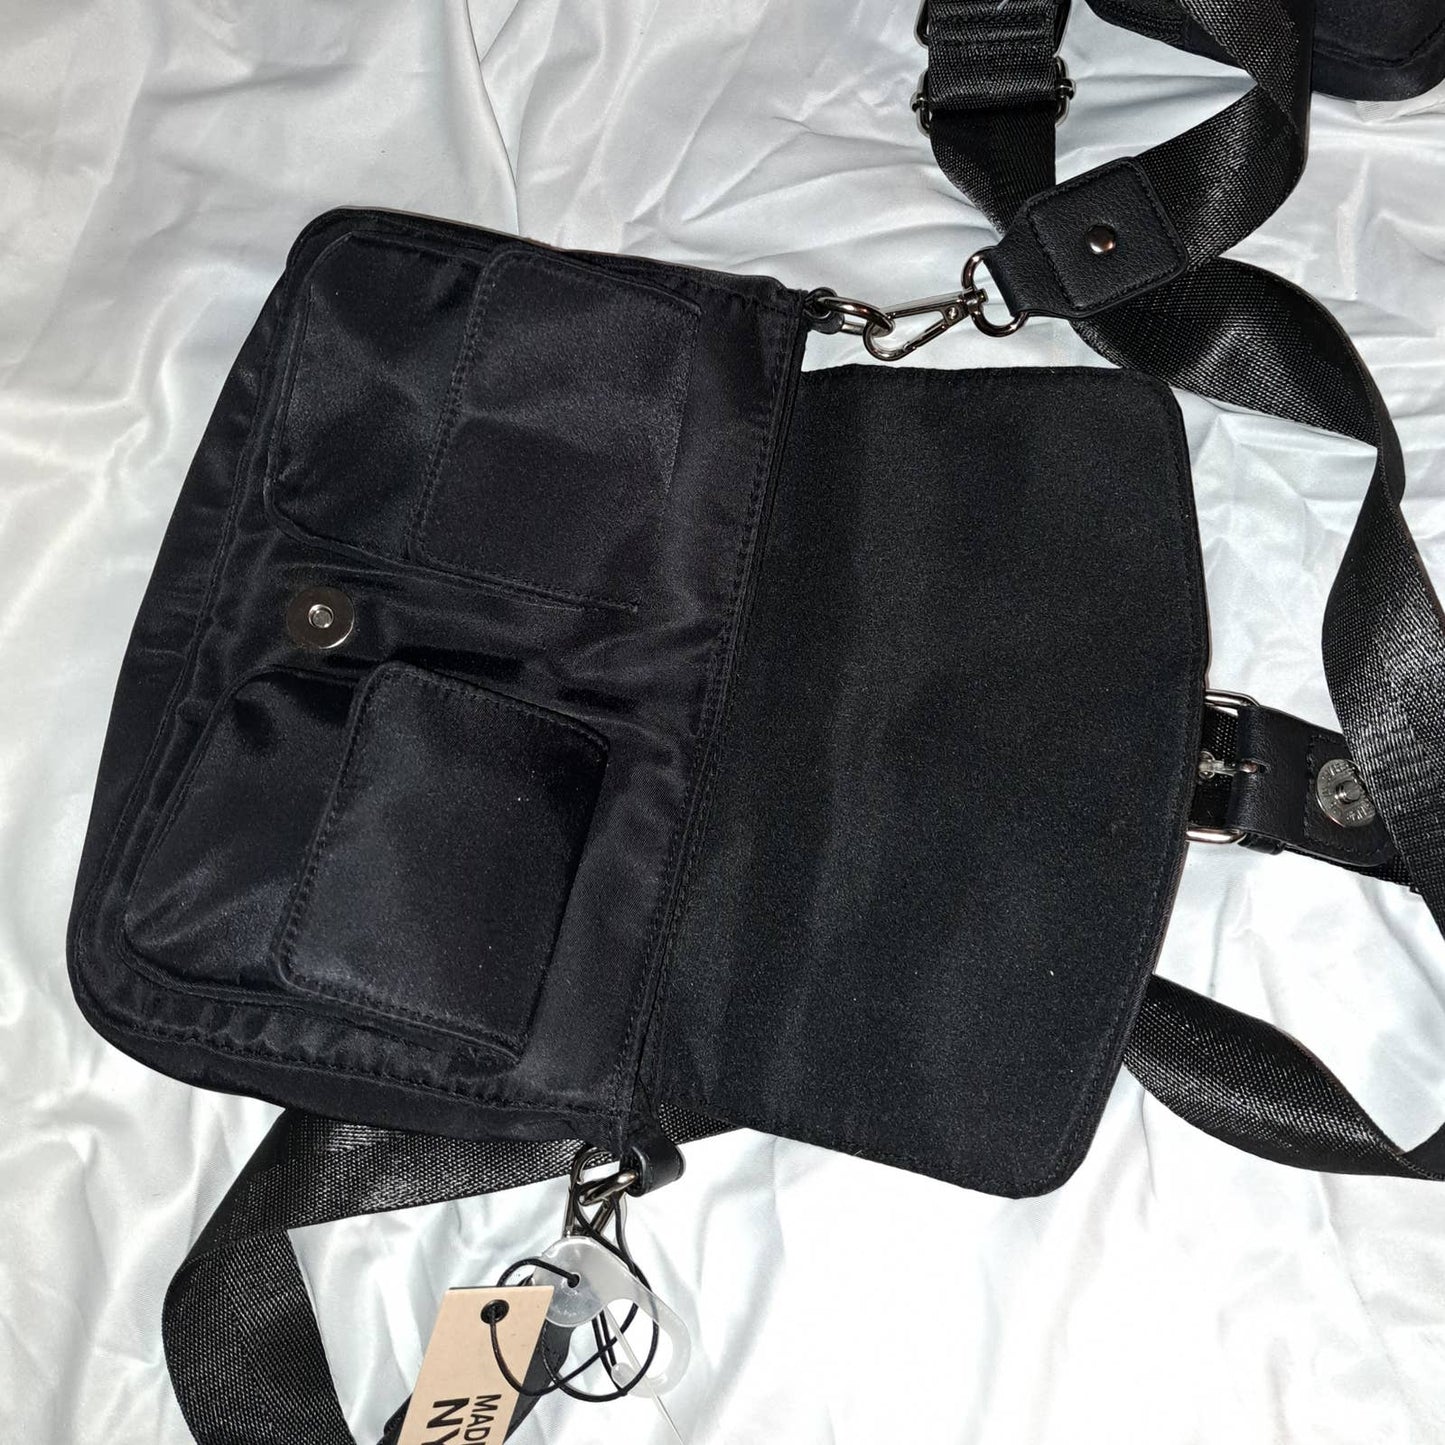 NWT Madden NYC Nylon Crossbody extra long strap and phone pouch